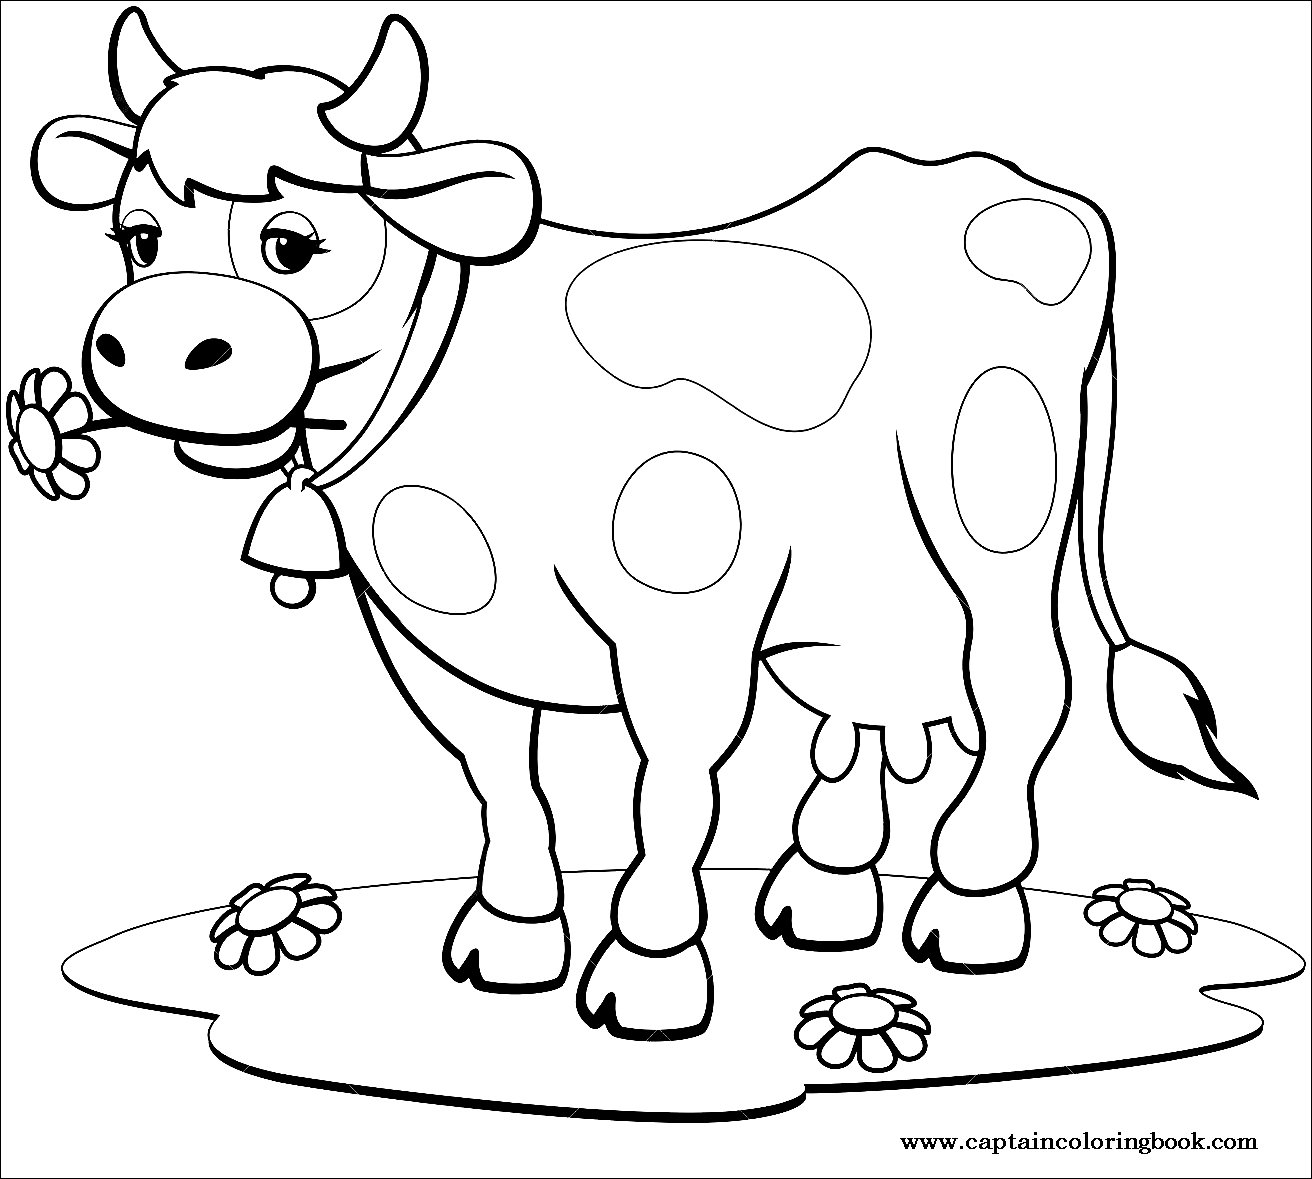 Coloring page beautiful cow for children 5-6 years old